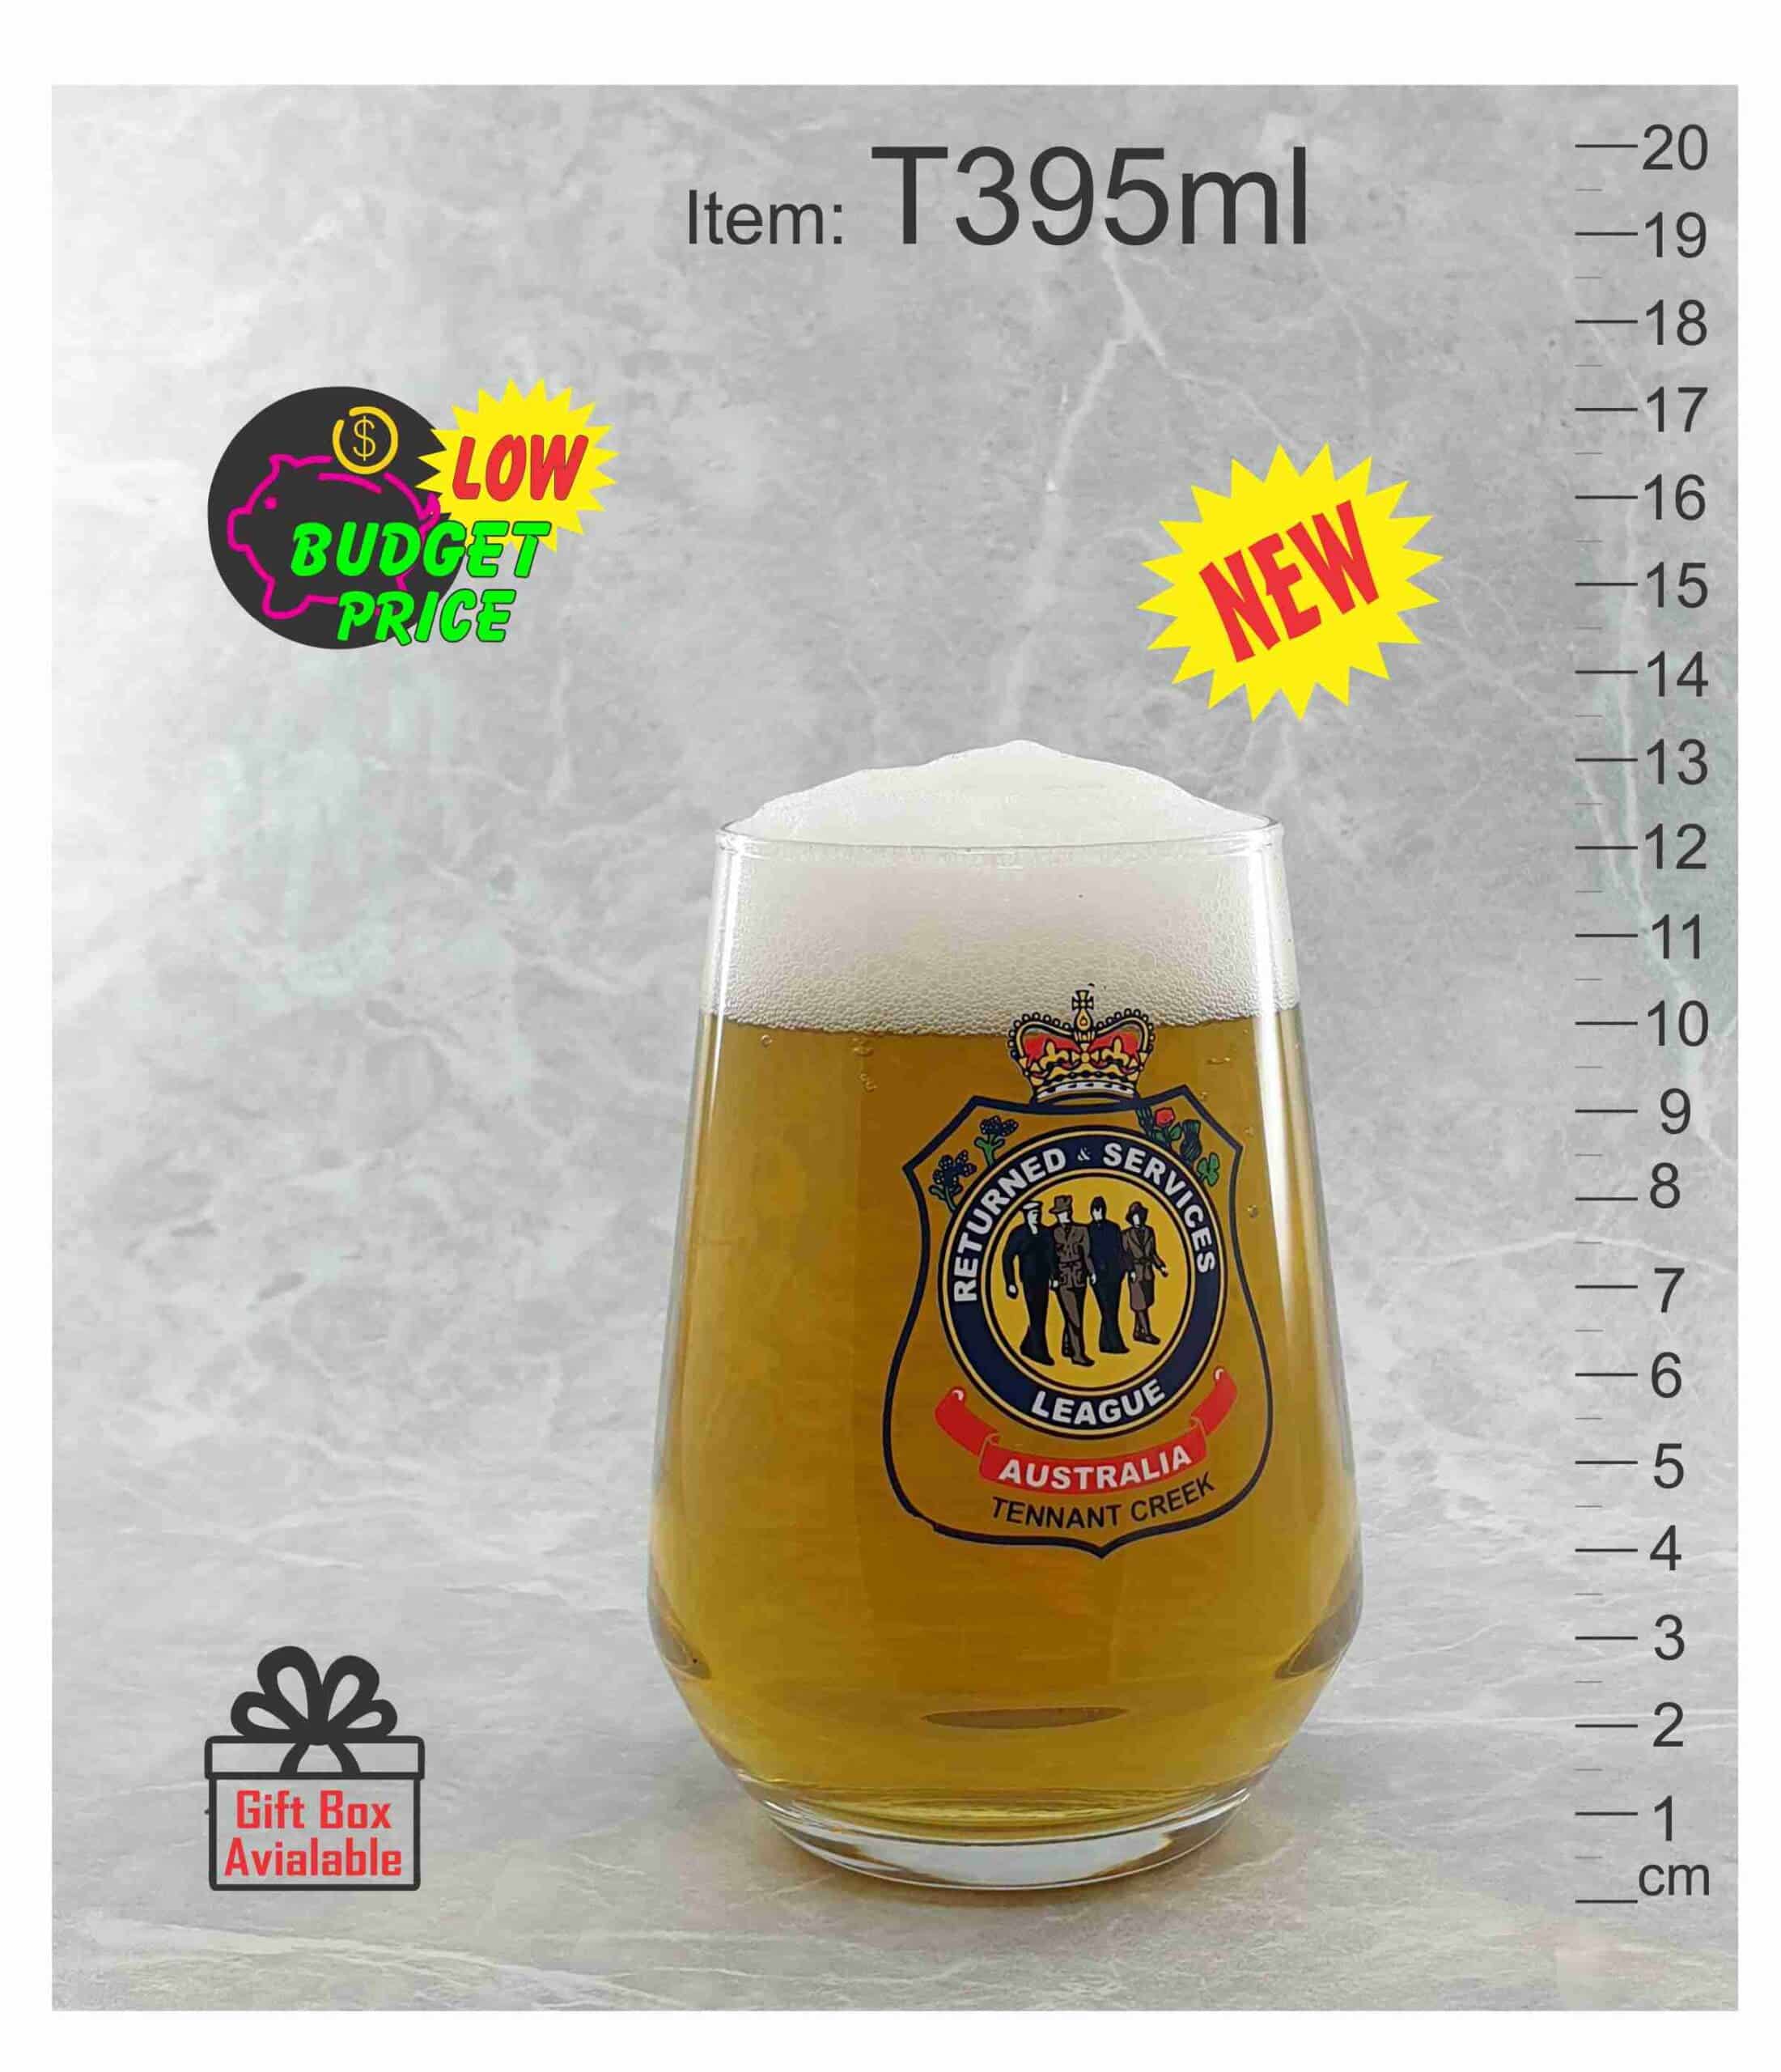 T395ml laser etched engraved beer middy low cost cheap schooner cup pot universal glass event festival Brisbane Australia abc2000 scaled